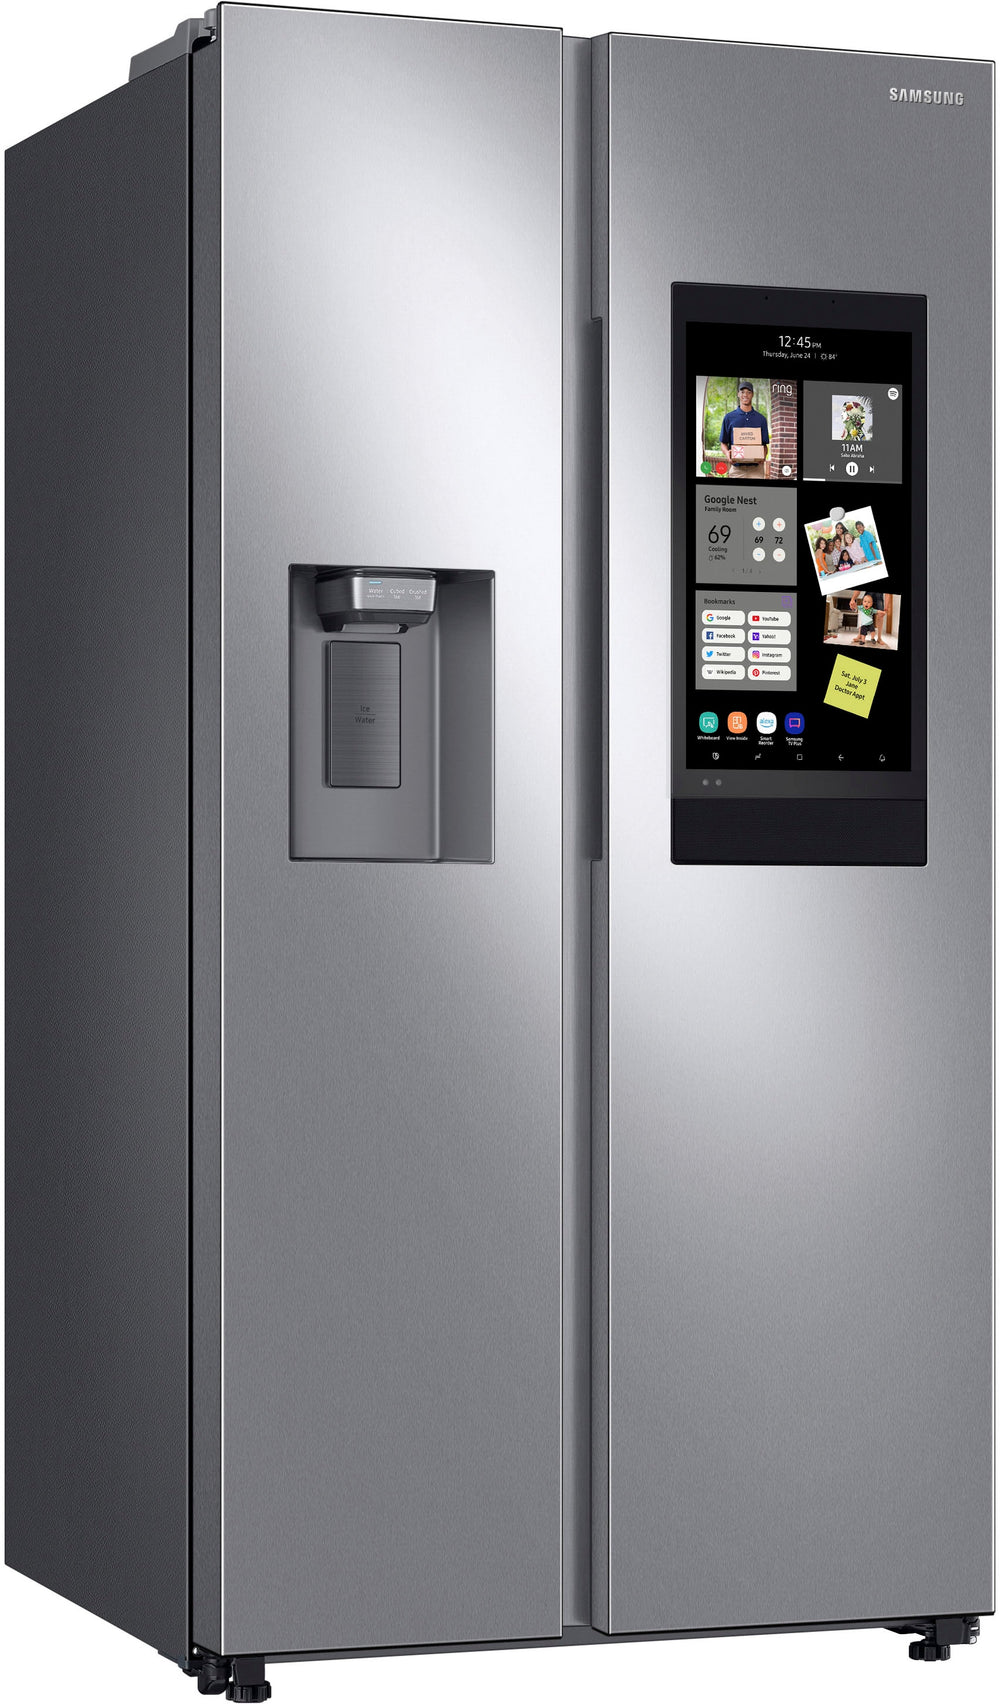 Samsung - 26.7 Cu. Ft. Side-by-Side Refrigerator with 21.5" Touch-Screen Family Hub - Stainless steel_1